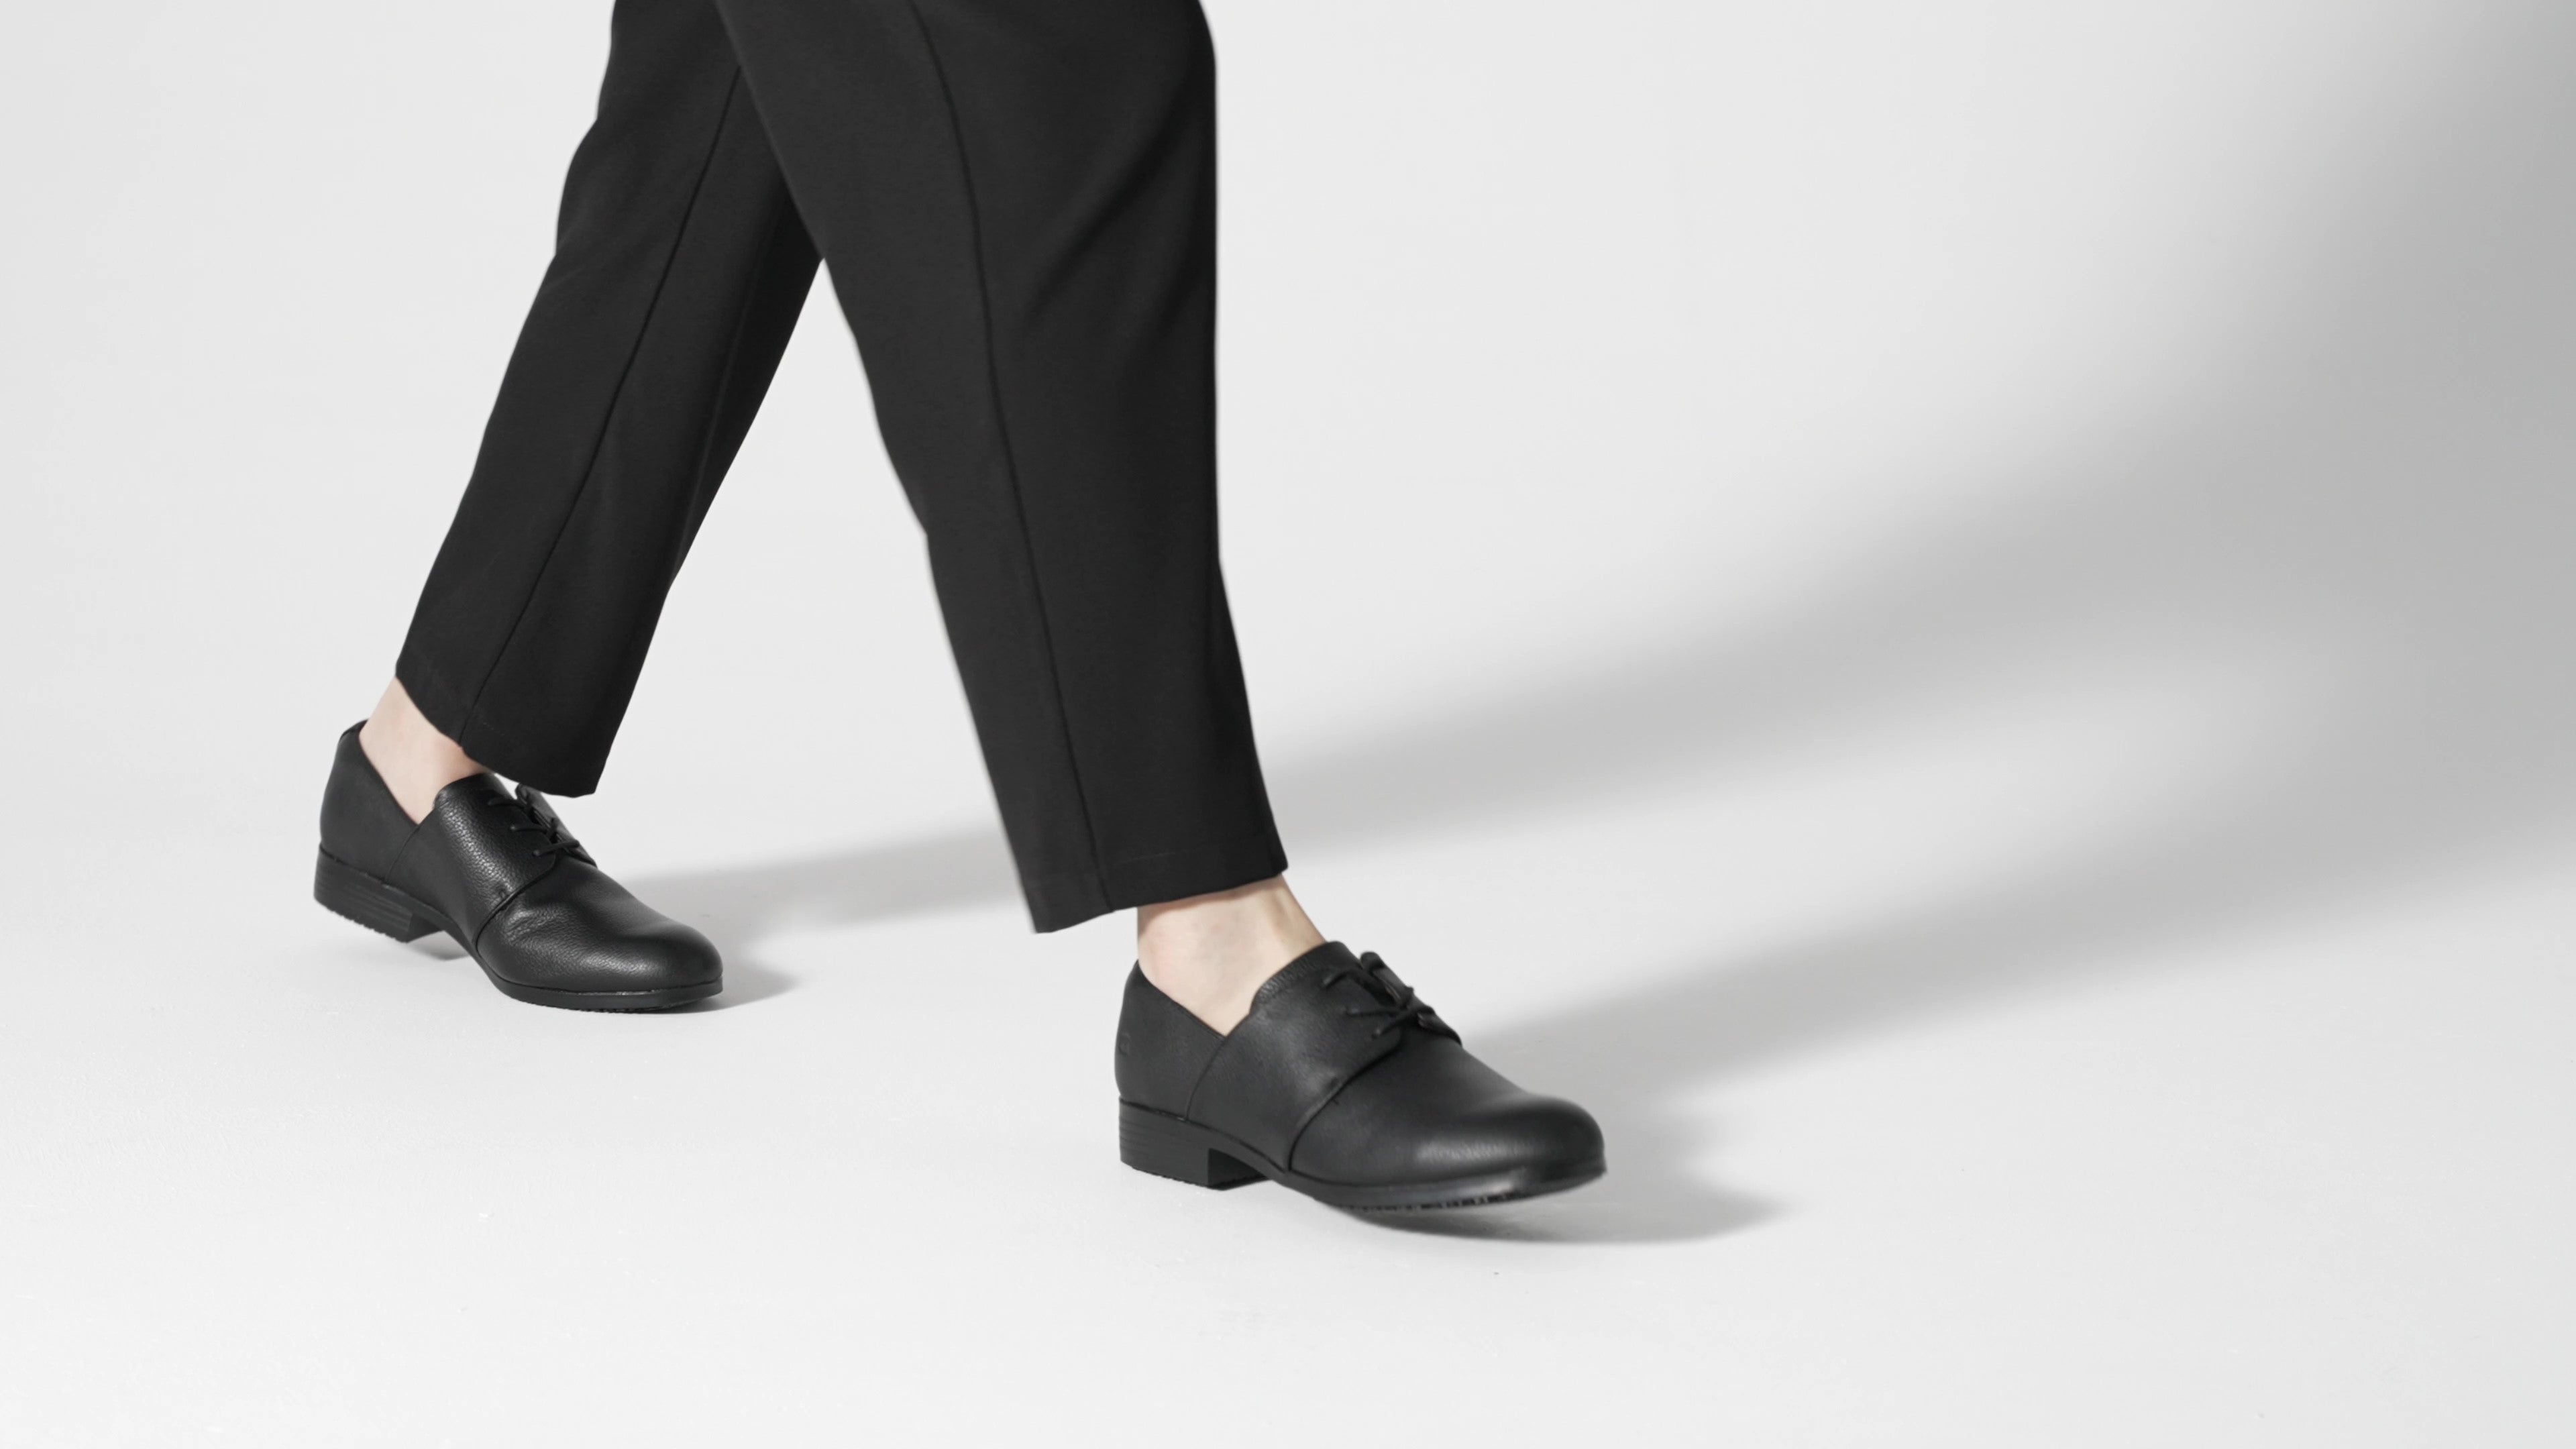 The Madison III from Shoes For Crews is an slip-resistant dress shoe designed to provide safety and security, product video.